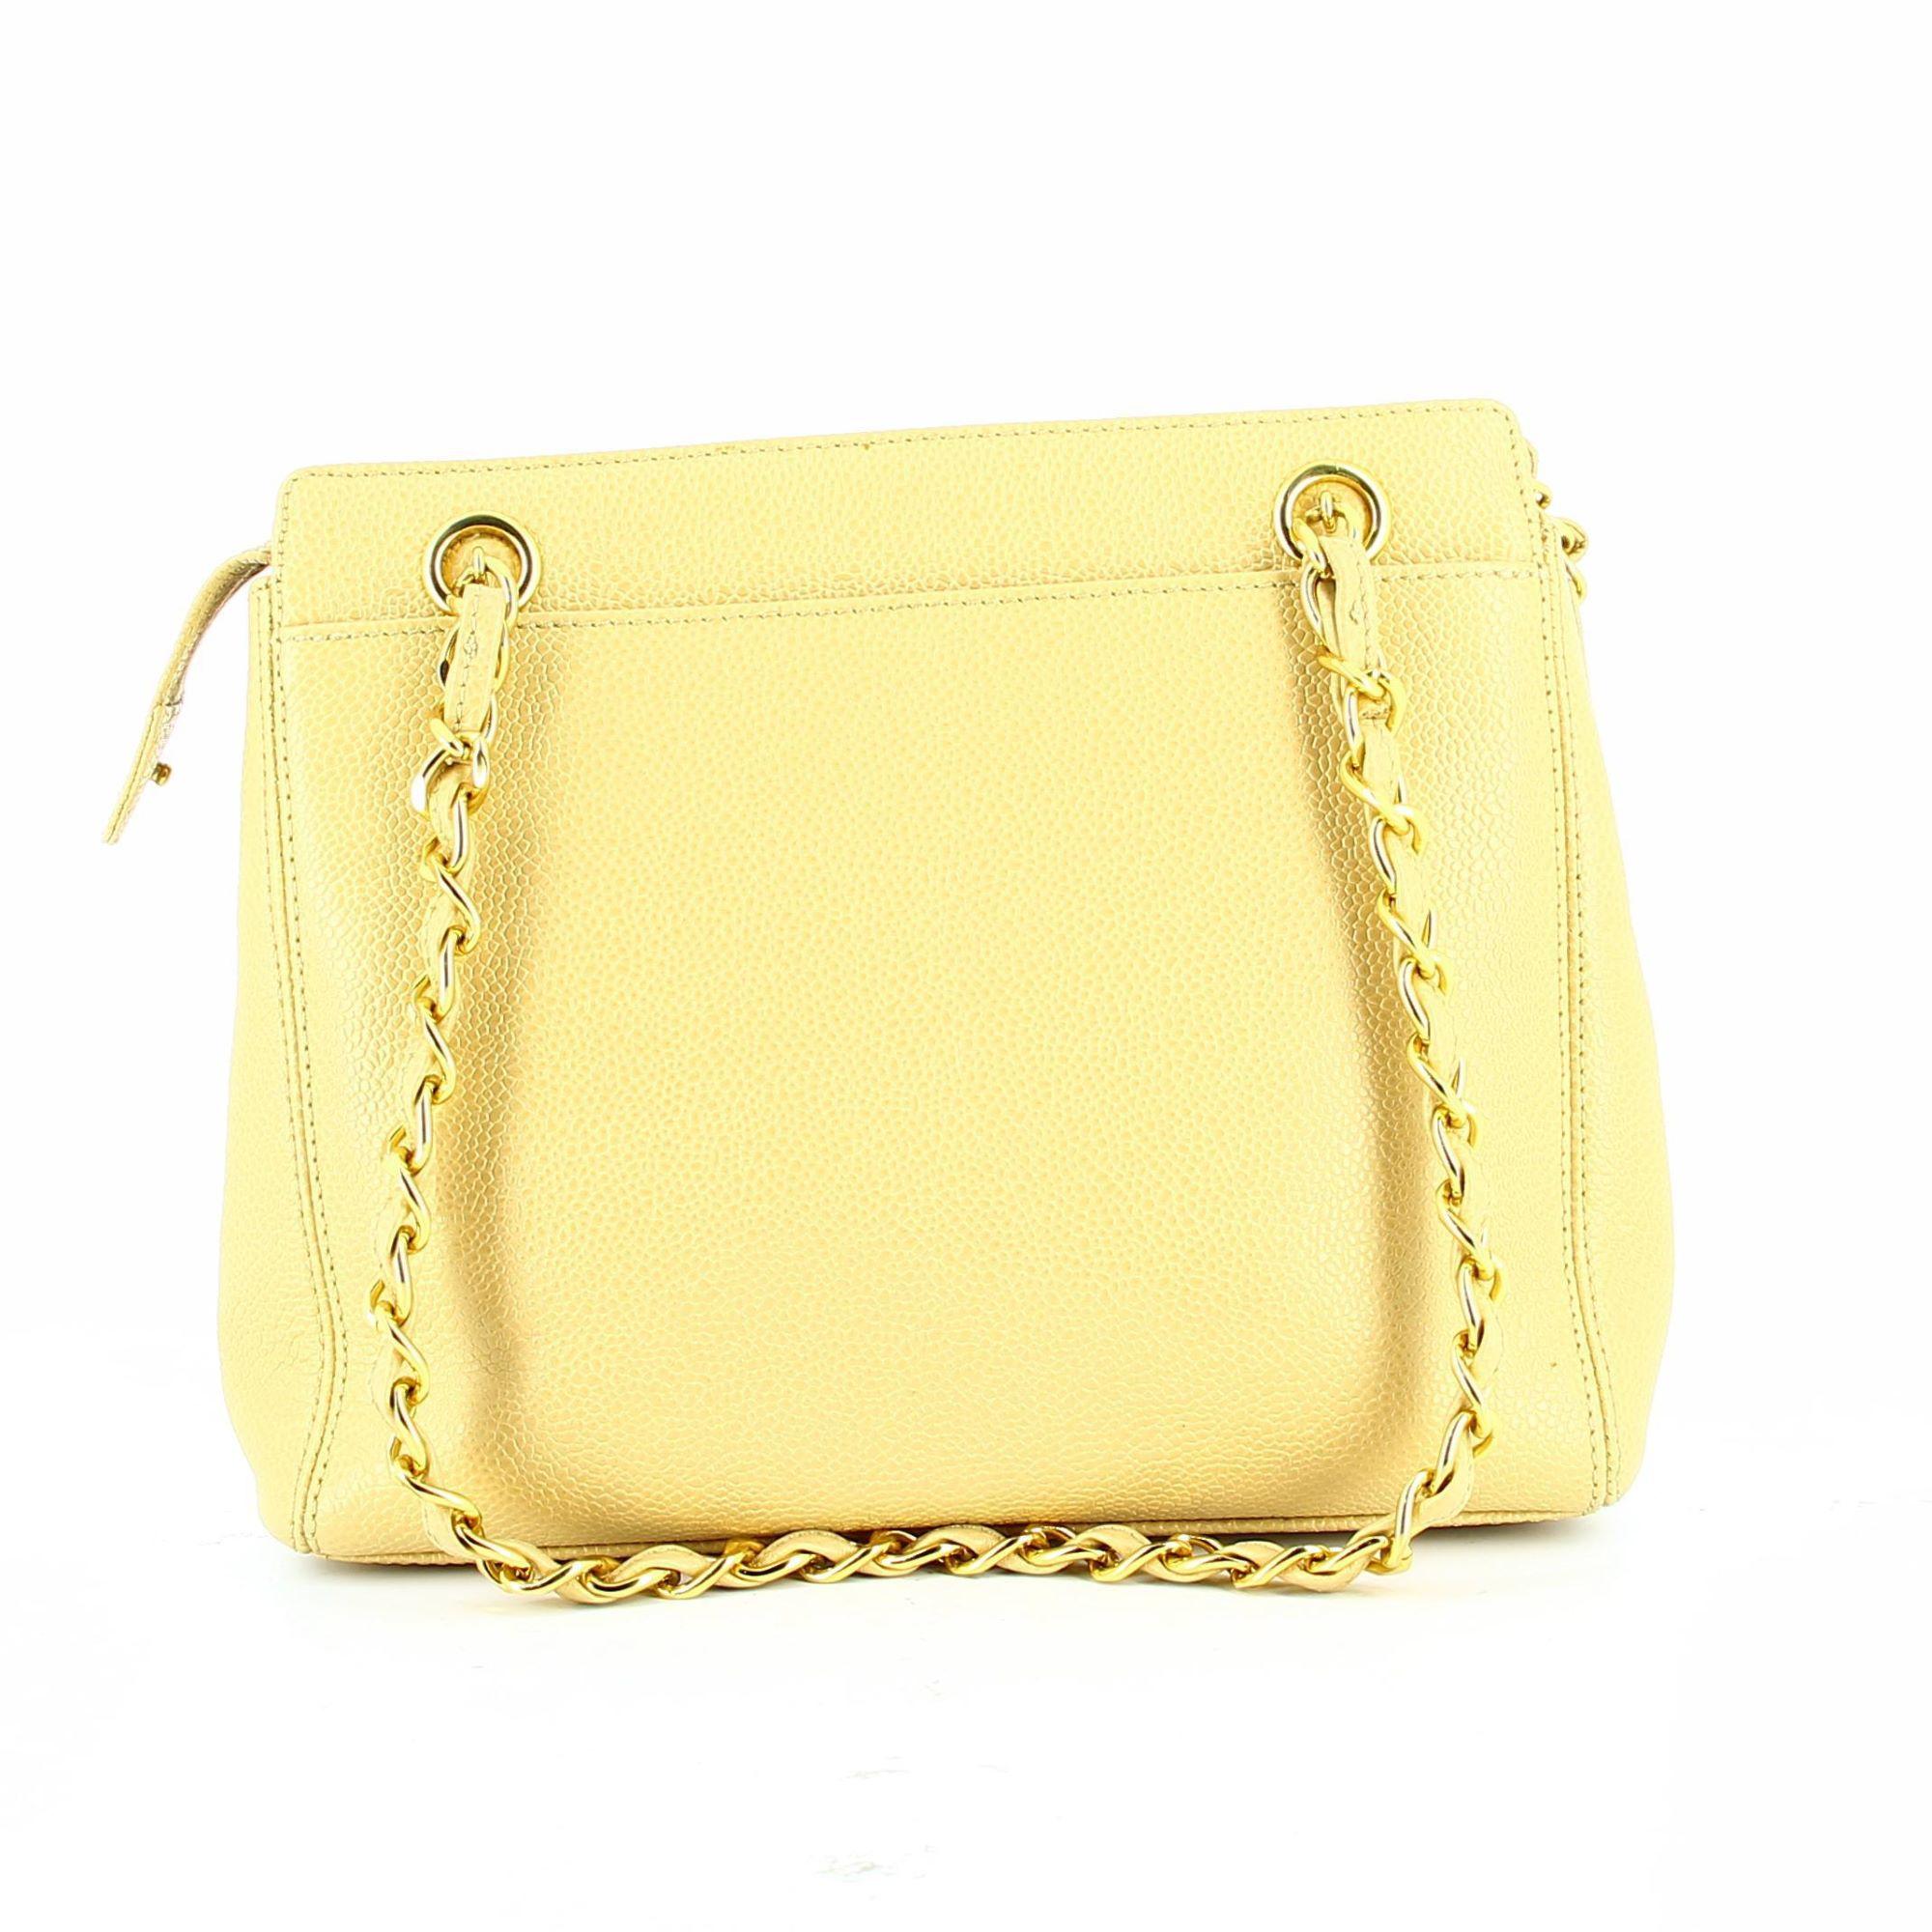 Women's or Men's 1990s Chanel Yellow Leather Bag